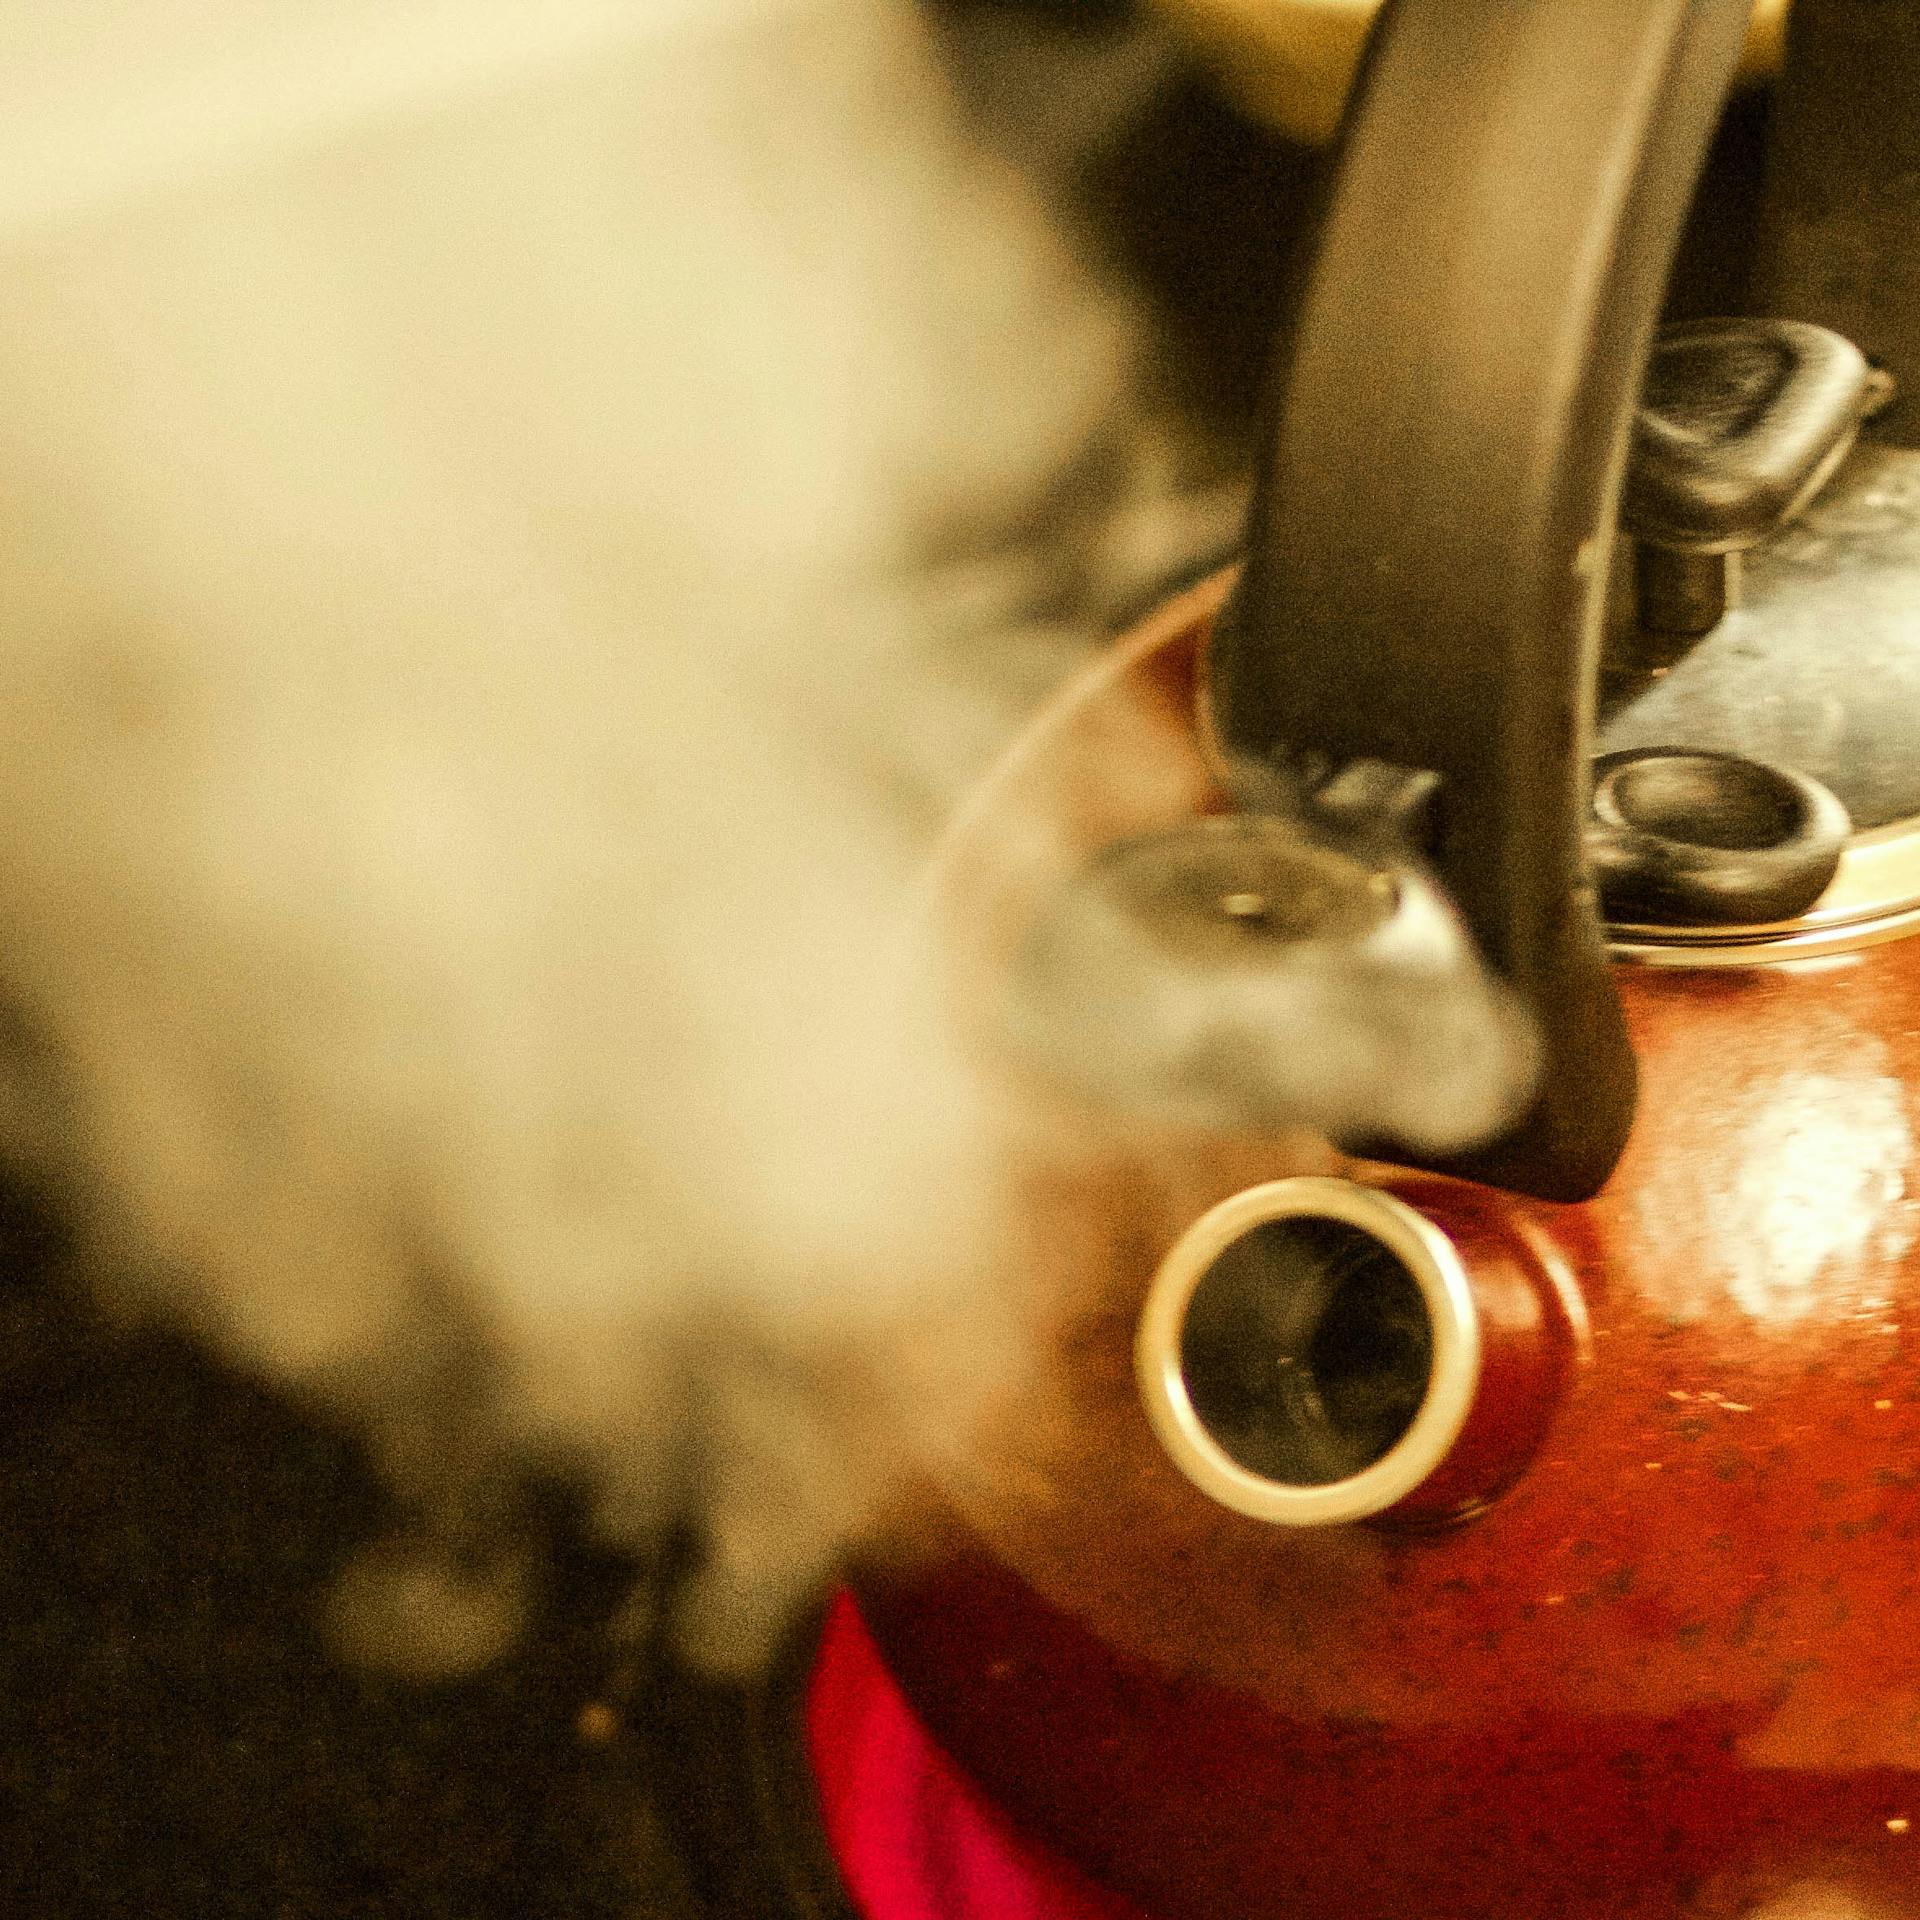 A steaming kettle | Source: Pexels